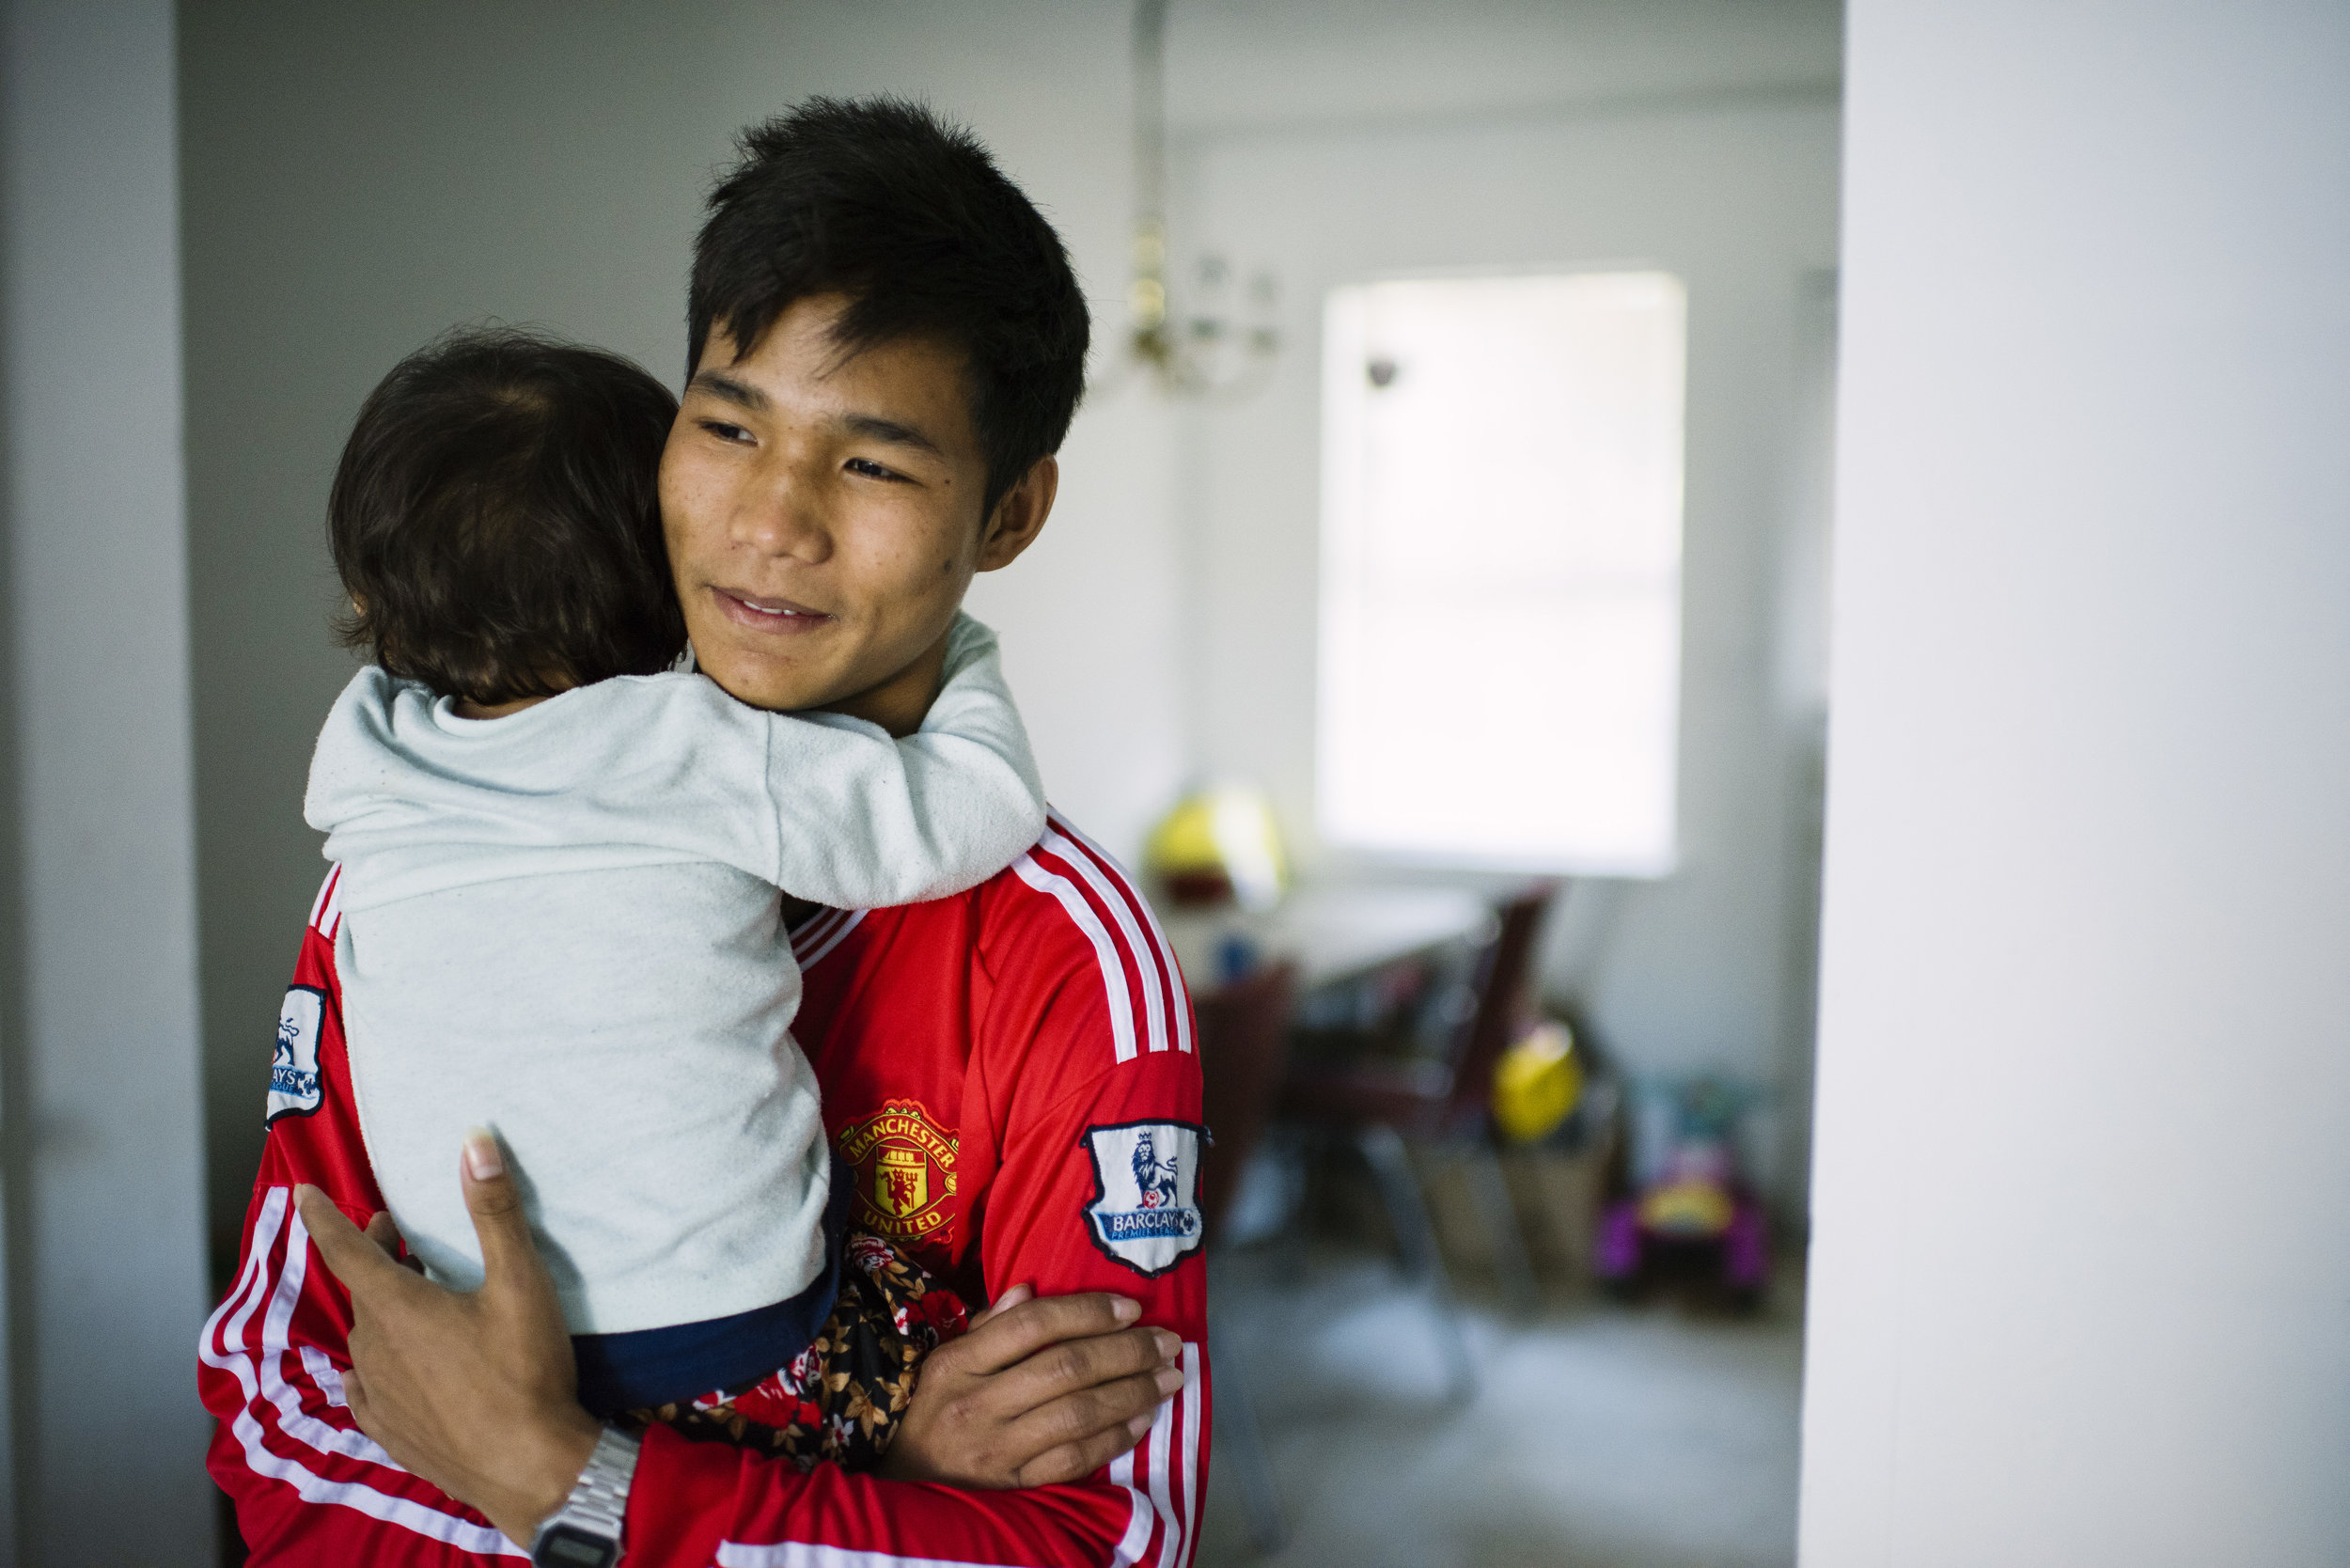  Soe Reh, 19, holds his youngest sister, Nga Meh, 2, at their apartment after she started crying. 